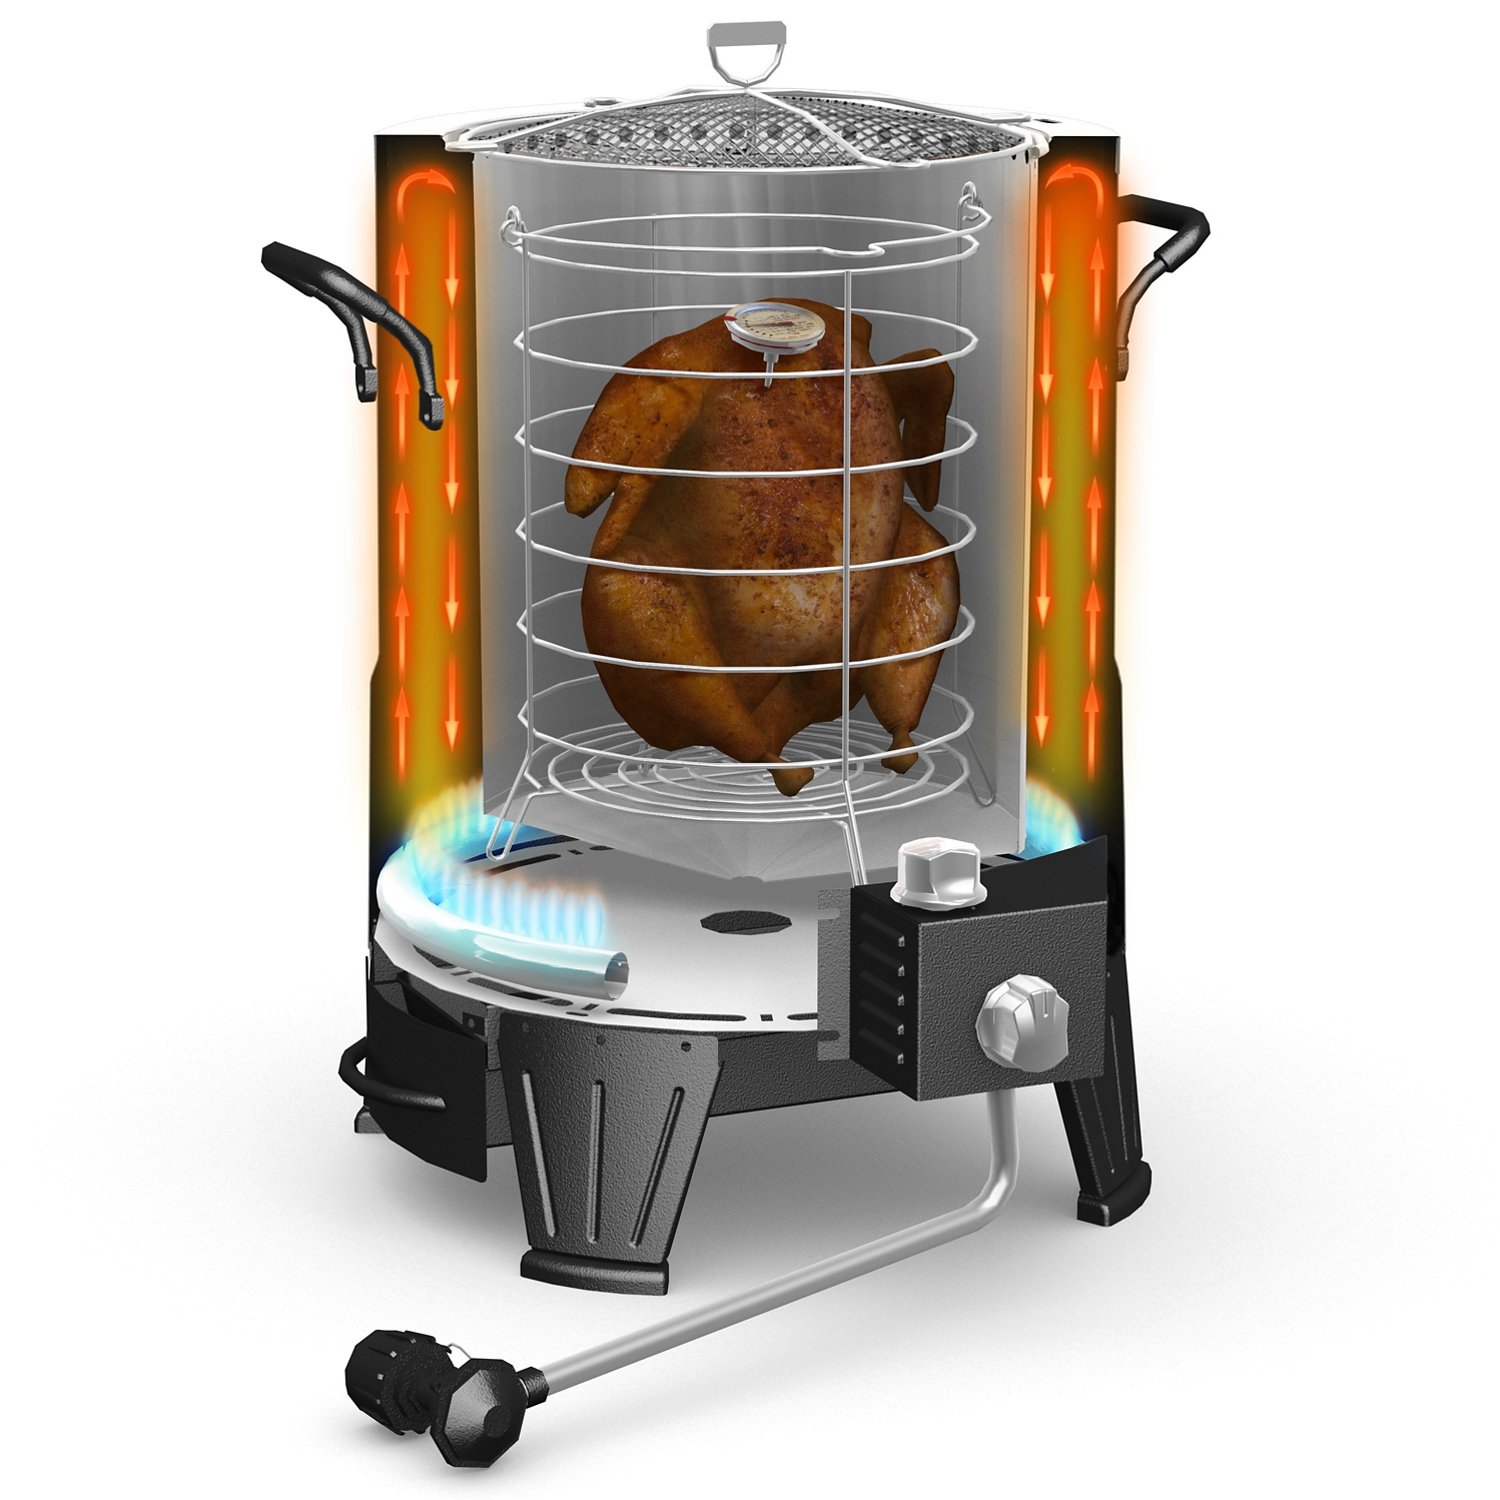 Oil-Less' Turkey Fryer Defies Laws of Physics